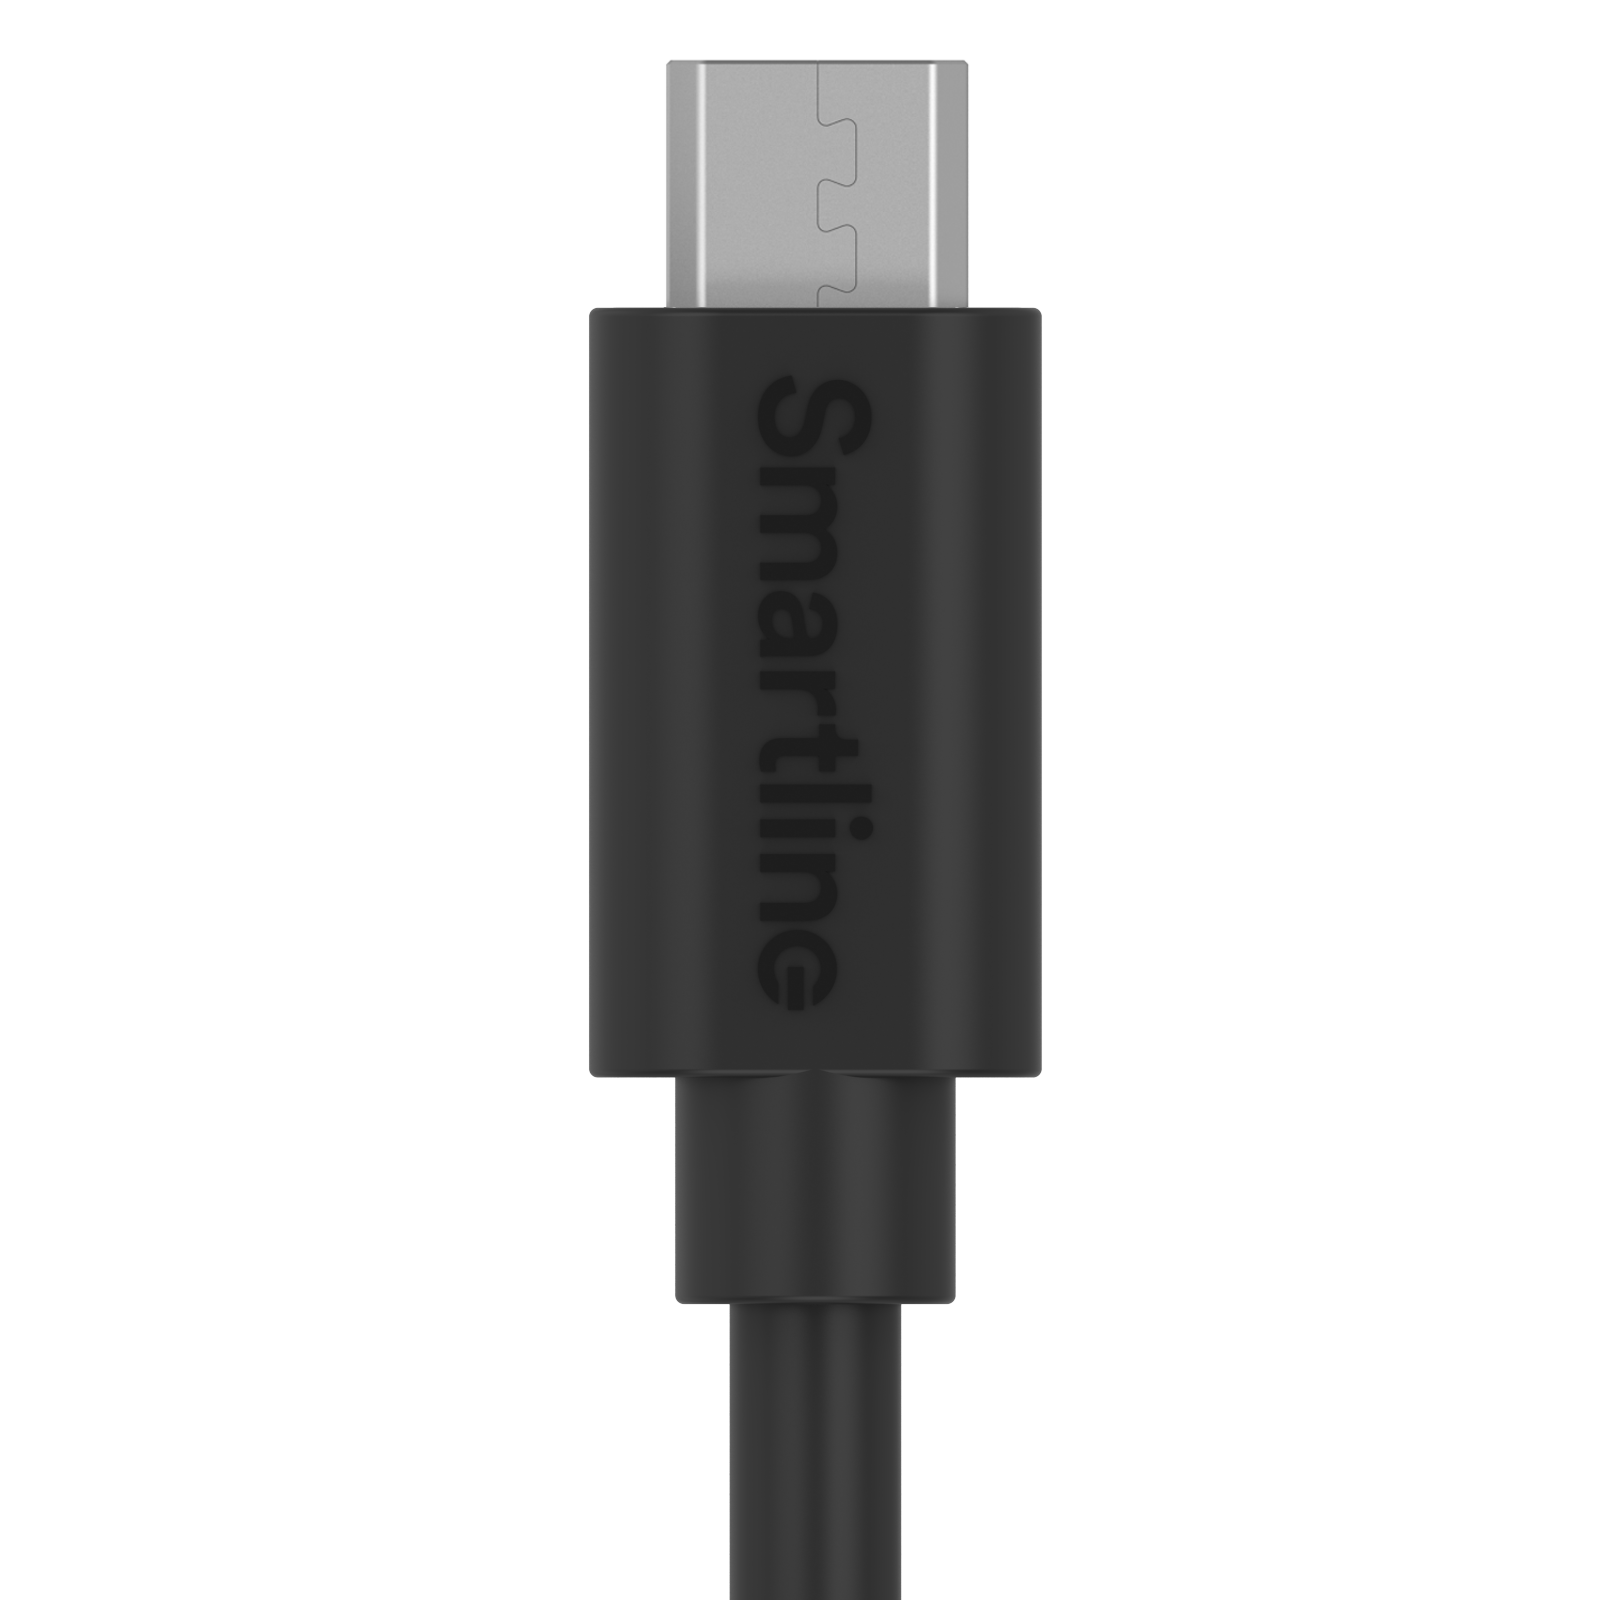 USB-A to MicroUSB Cable 2 meters Black